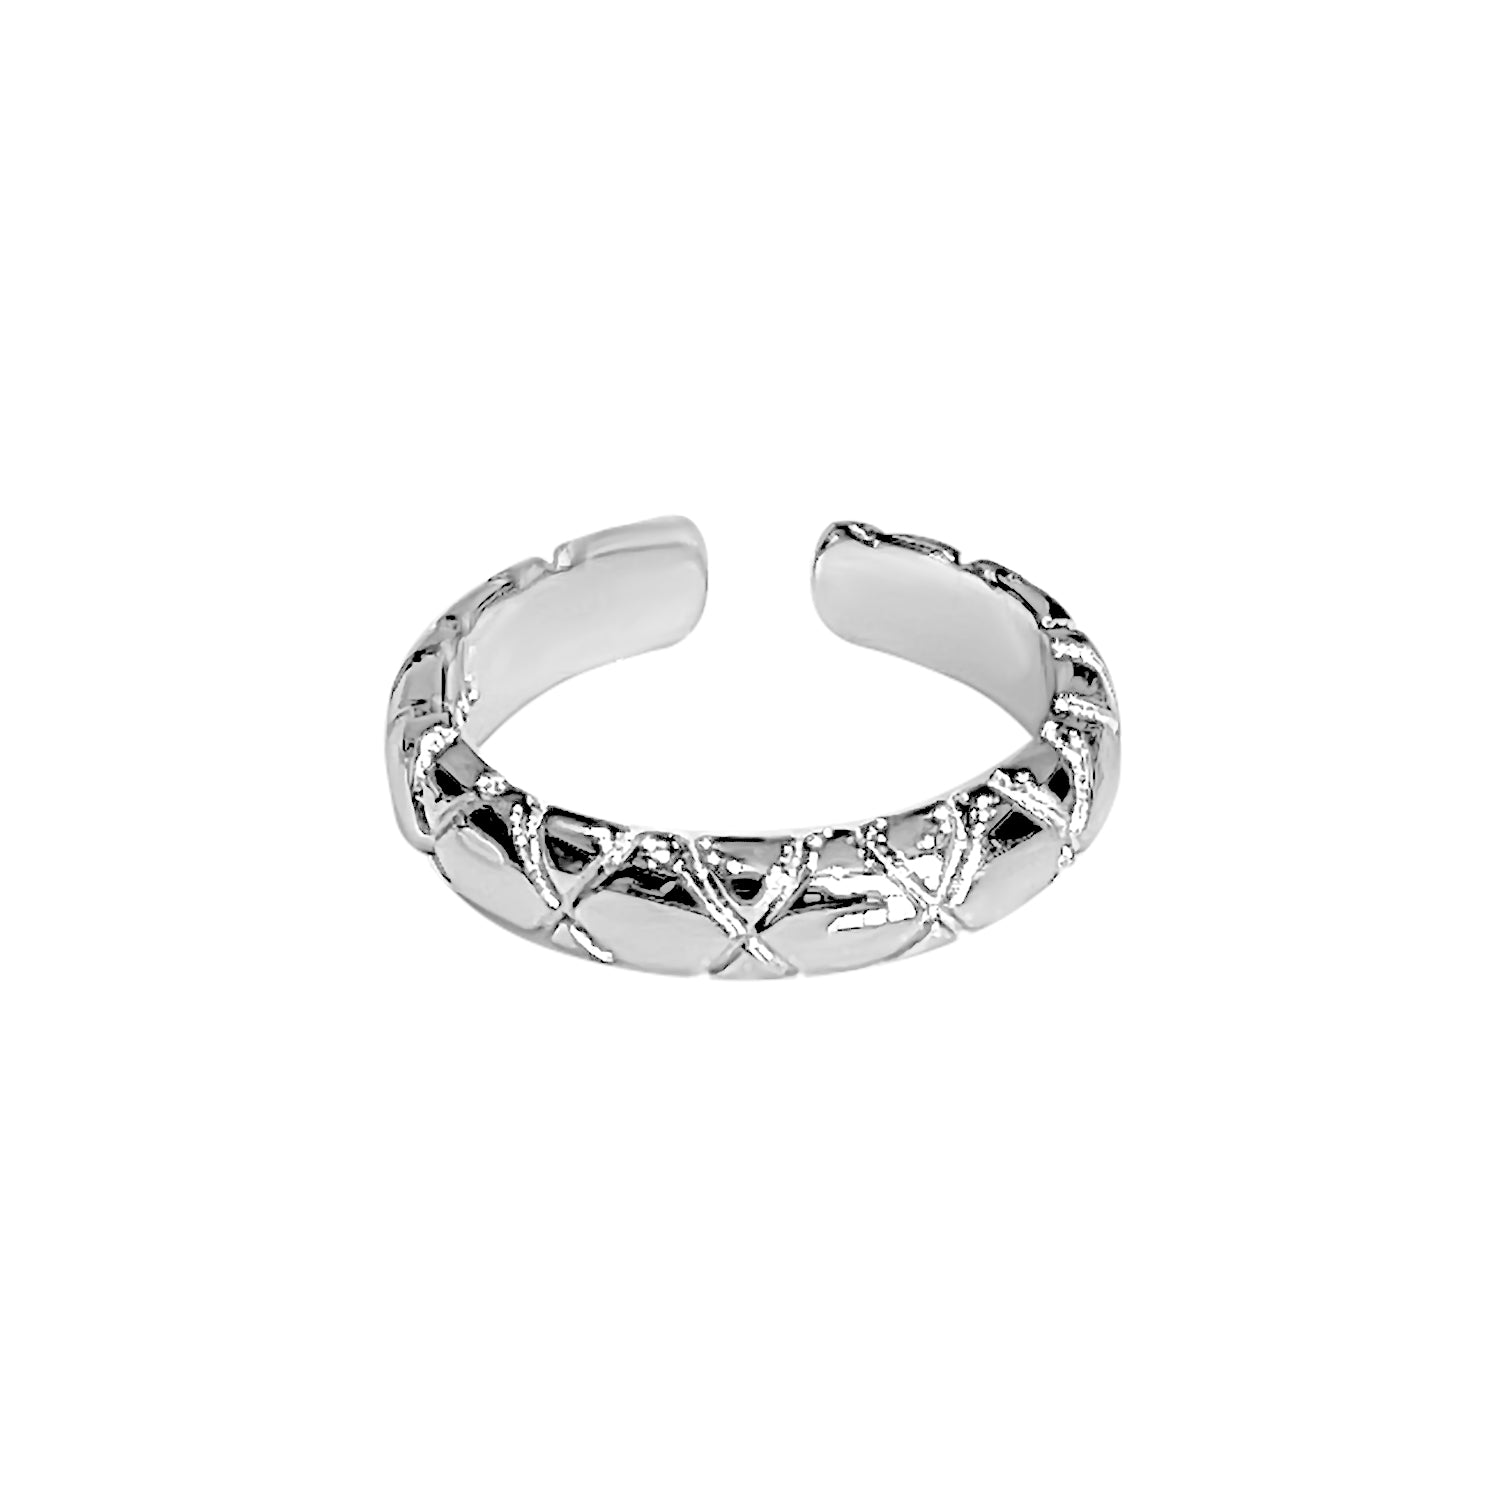 Adjustable Thin Band Ring in Silver